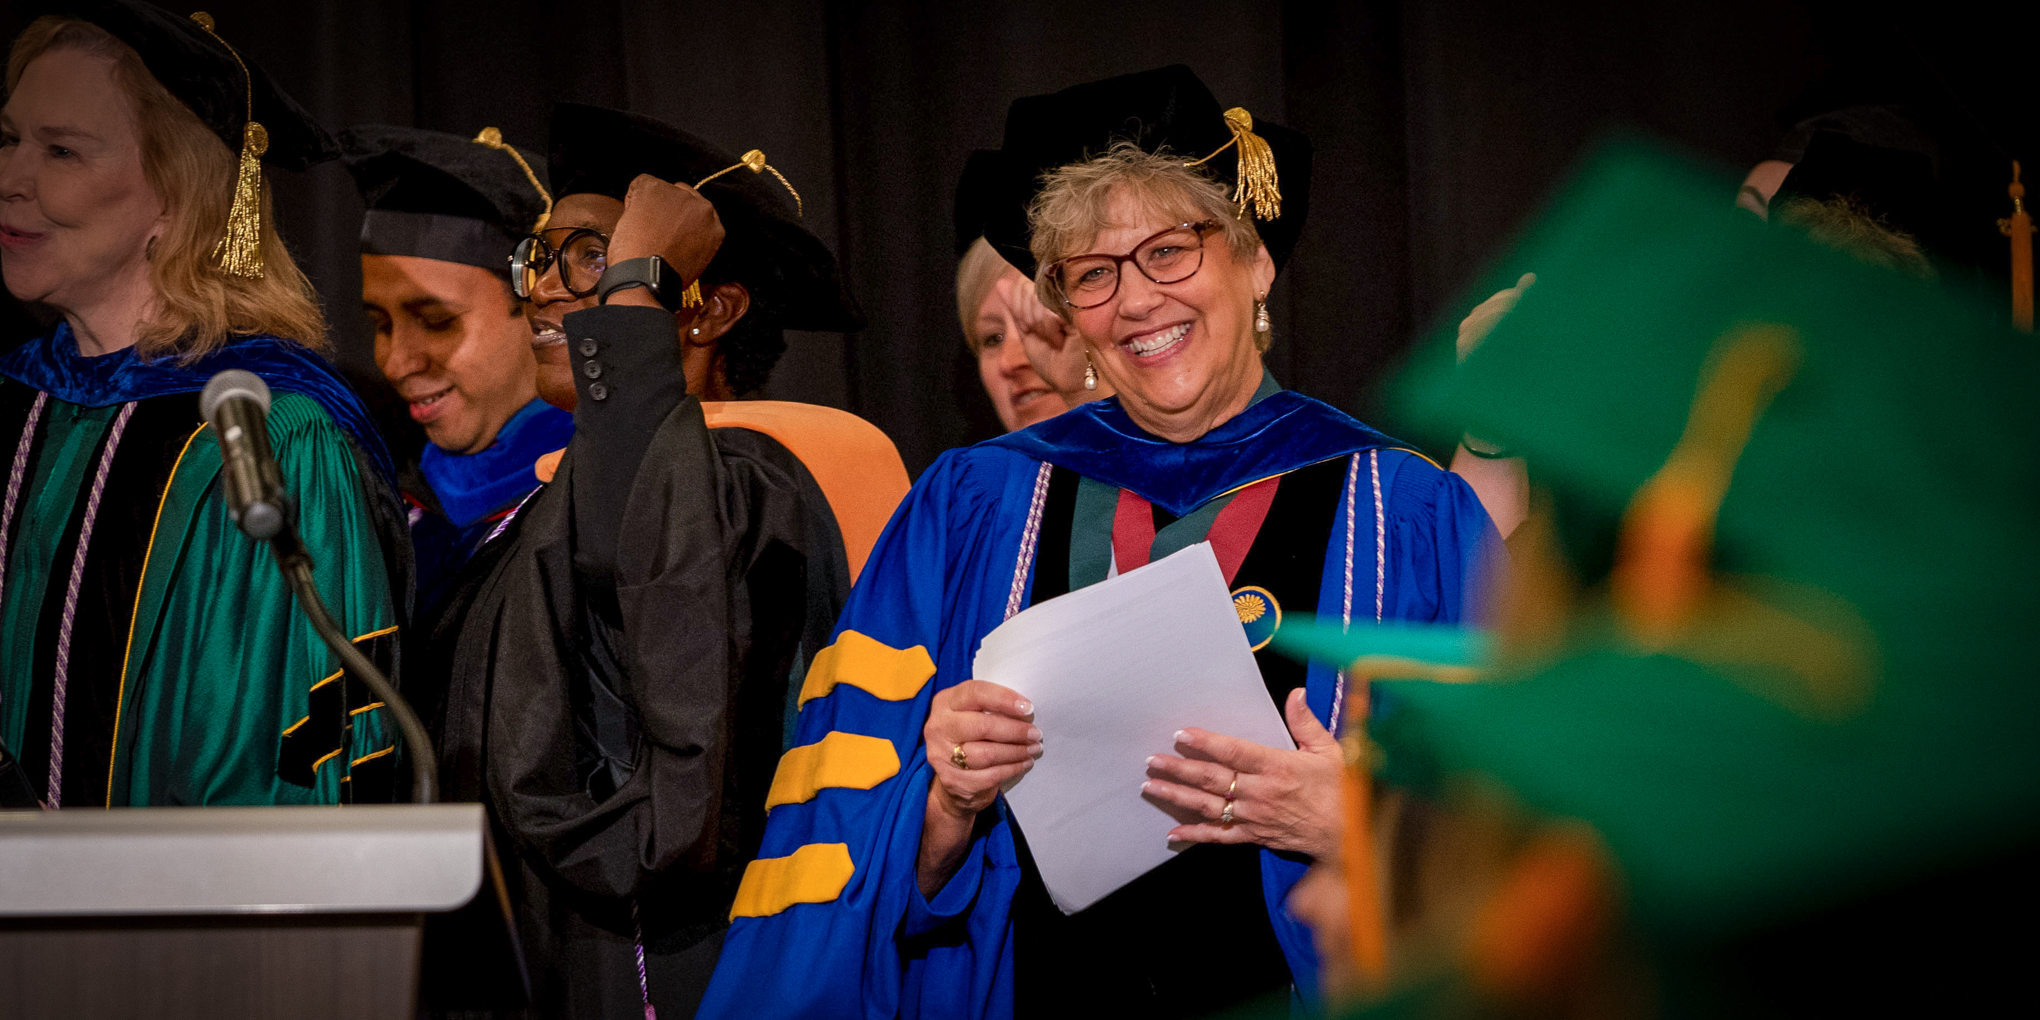 Dean Leigh Small celebrates a CON graduation ceremony with students, faculty, and guests.